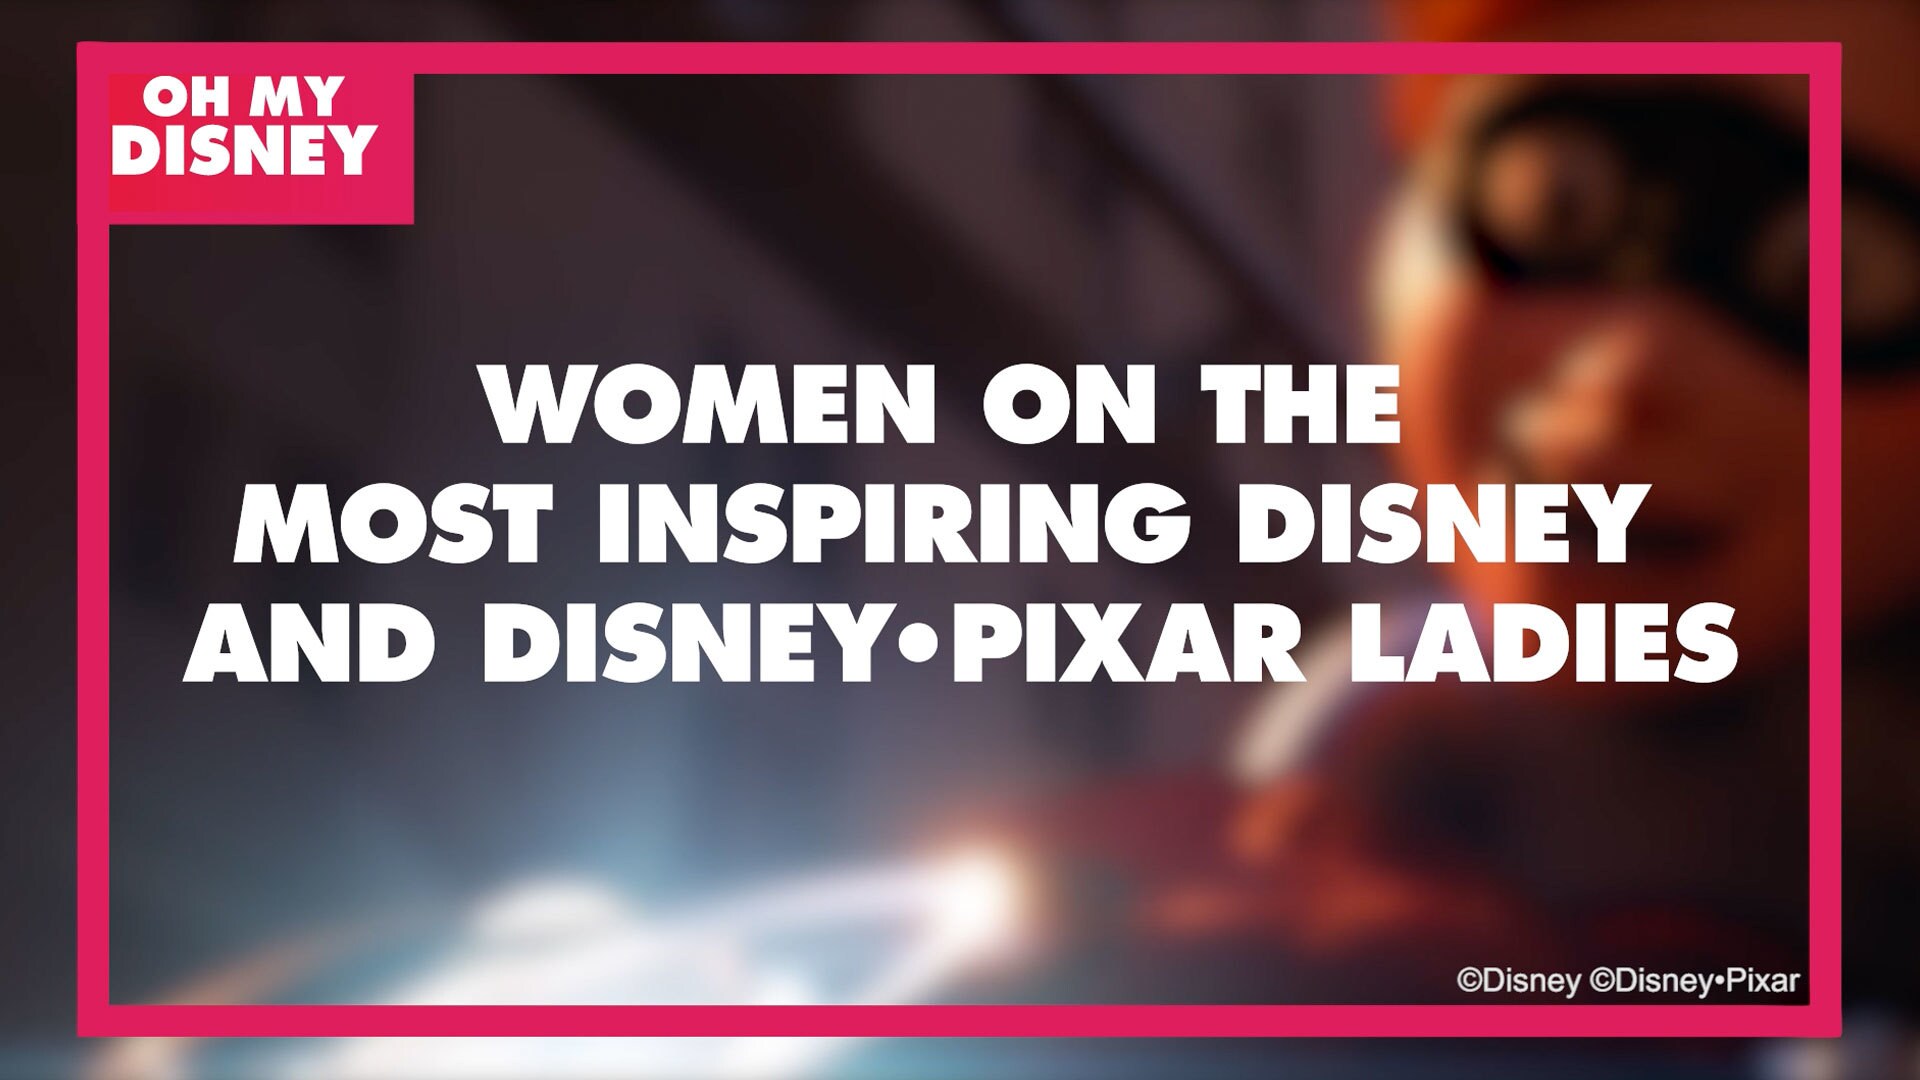 Which Disney or Disney•Pixar leading lady inspires you the most?